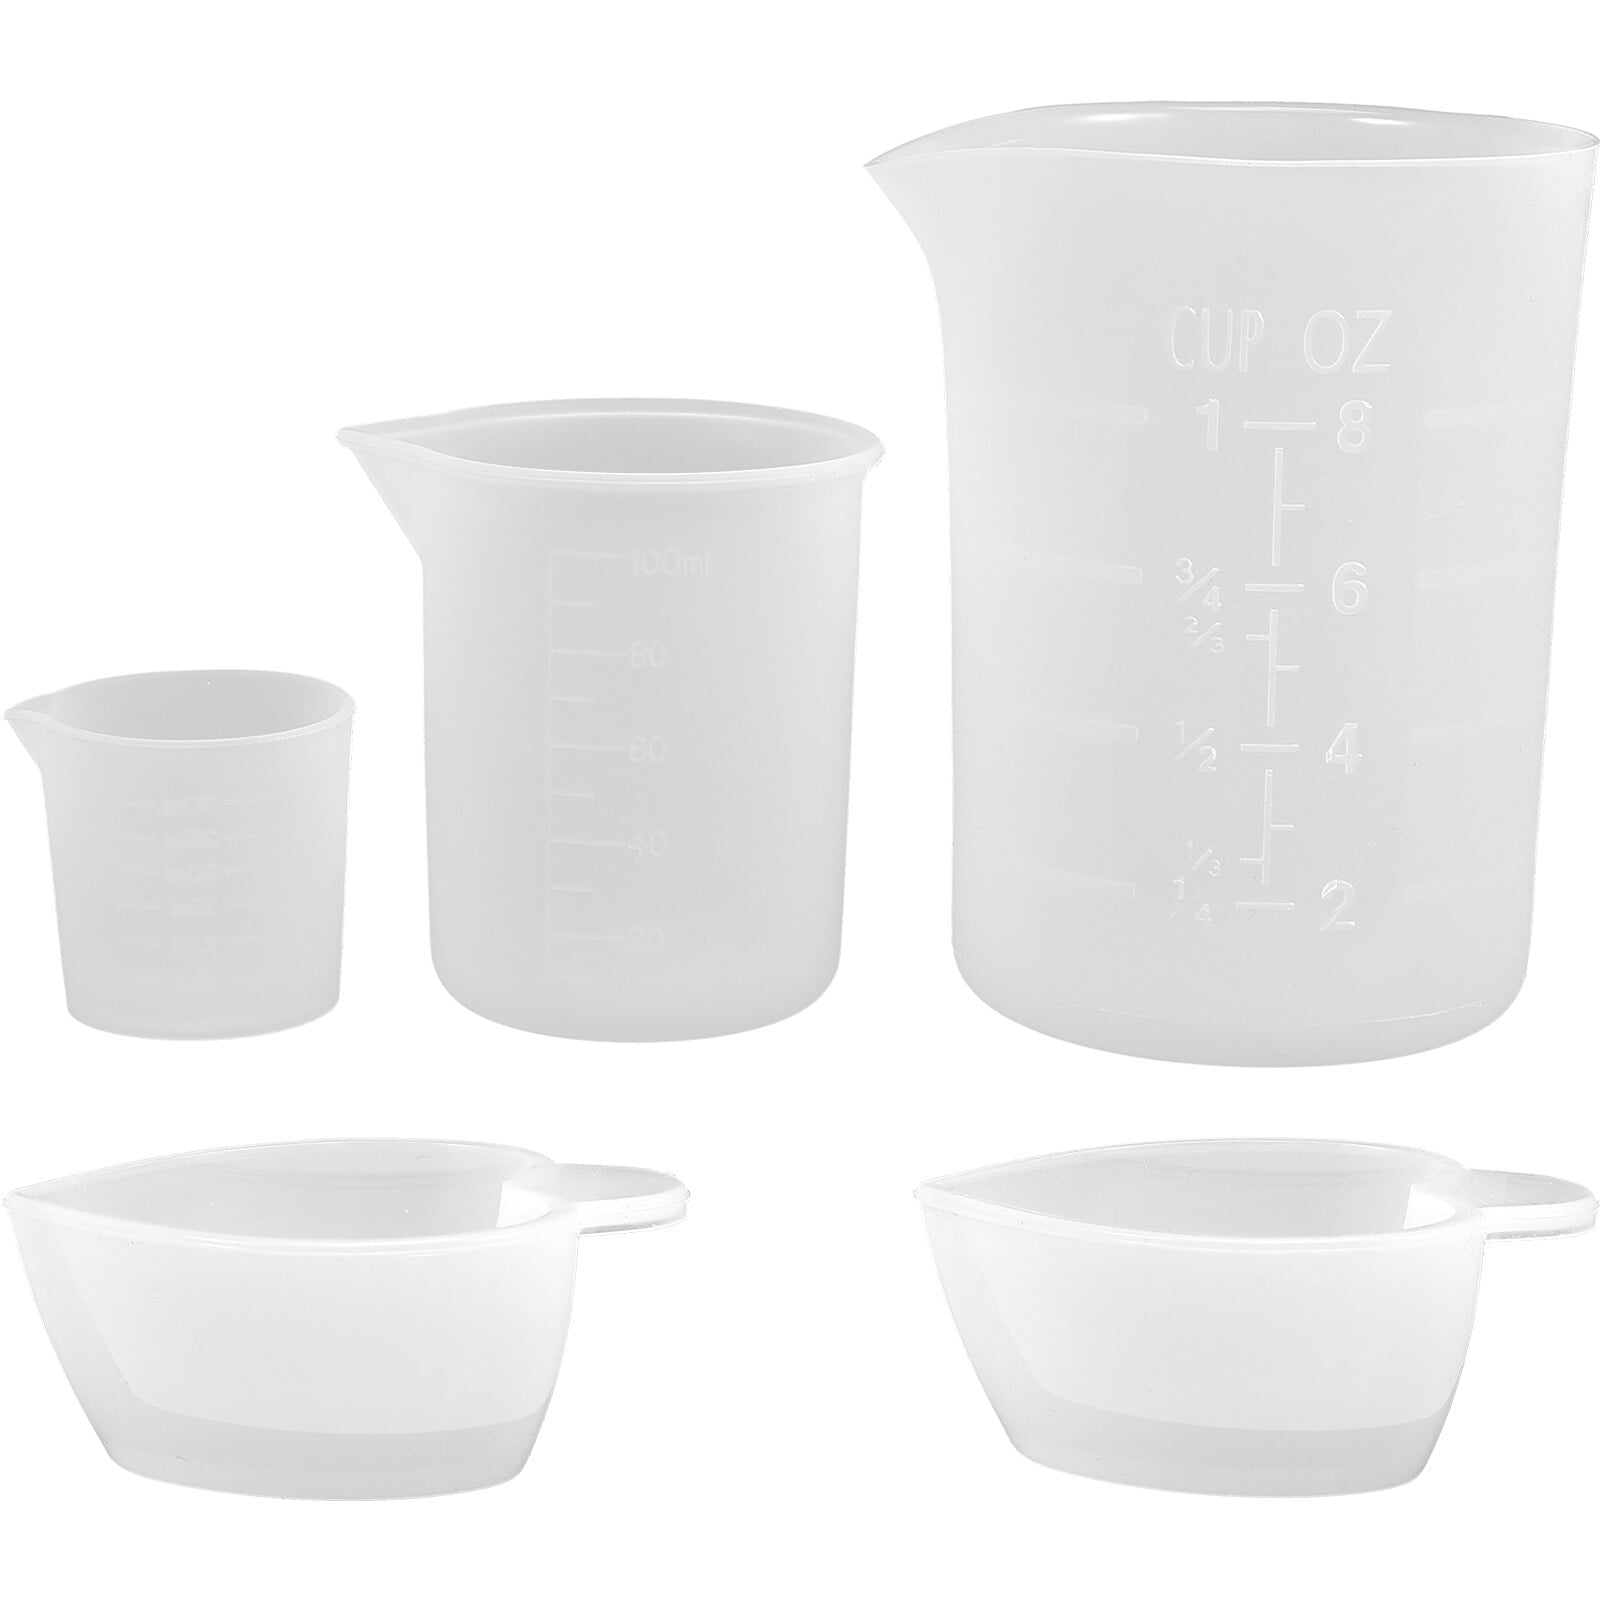 Calibrated Cups for Measuring and Mixing Epoxy by Volume - GlassCast